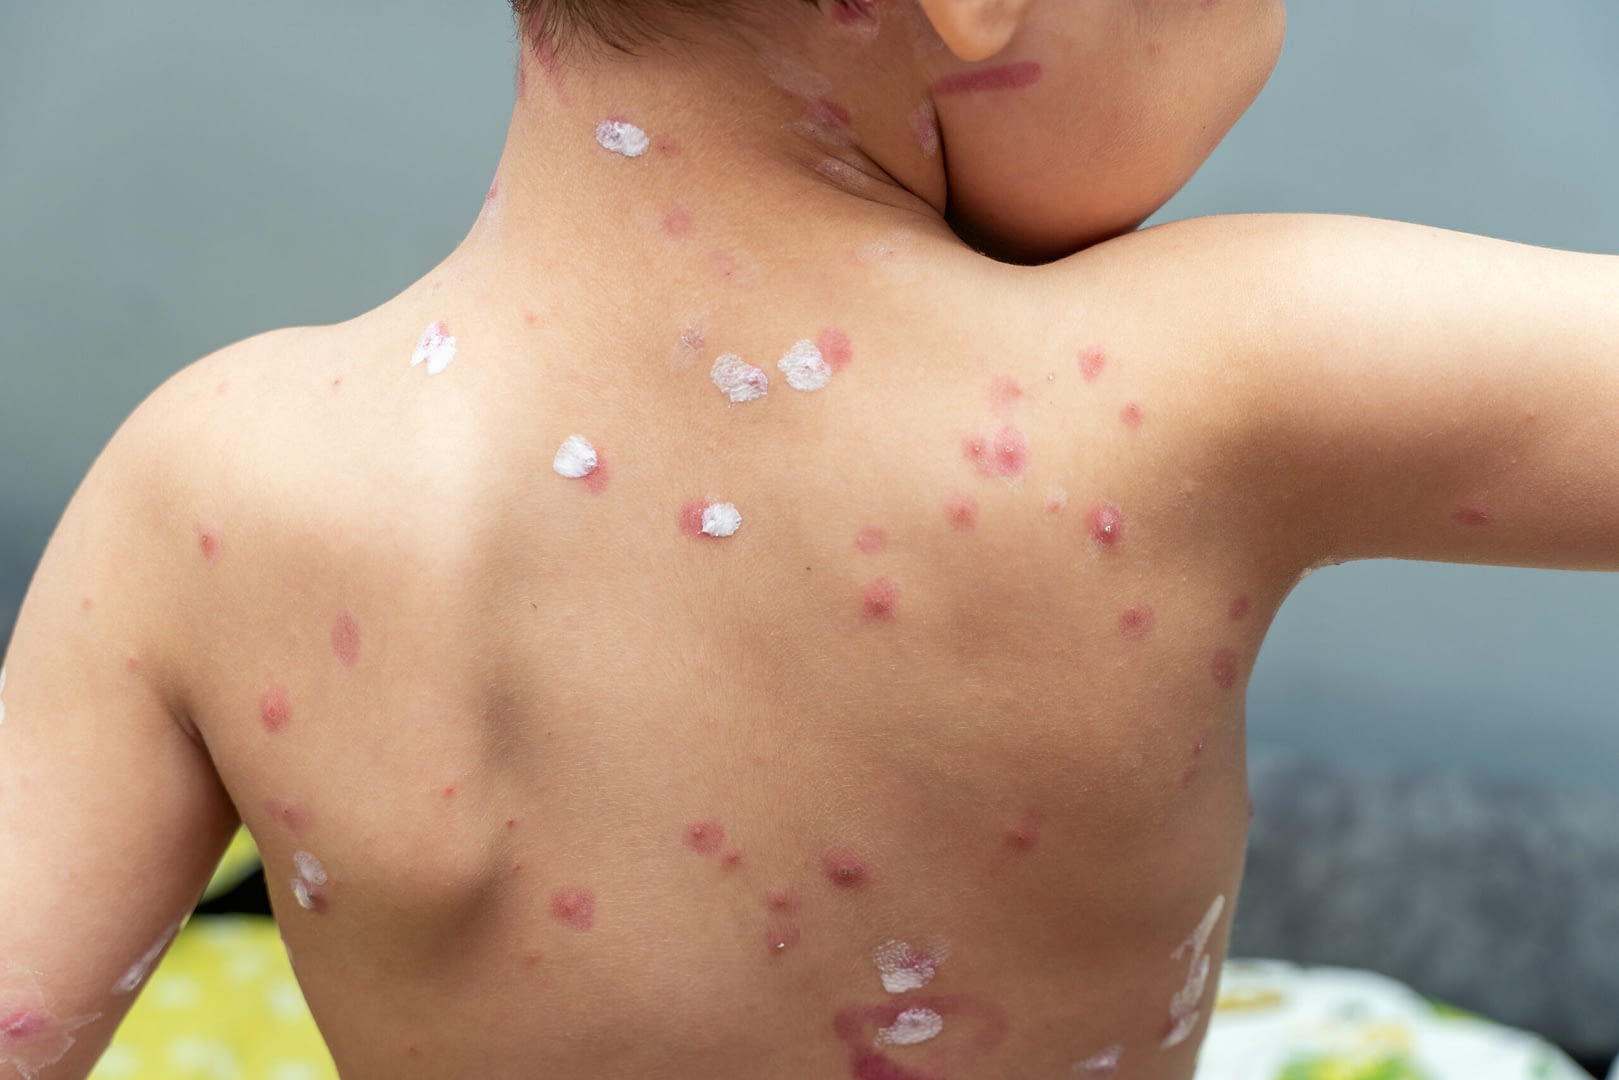 treatment ulcers from chickenpox varicella with medical cream kid skin